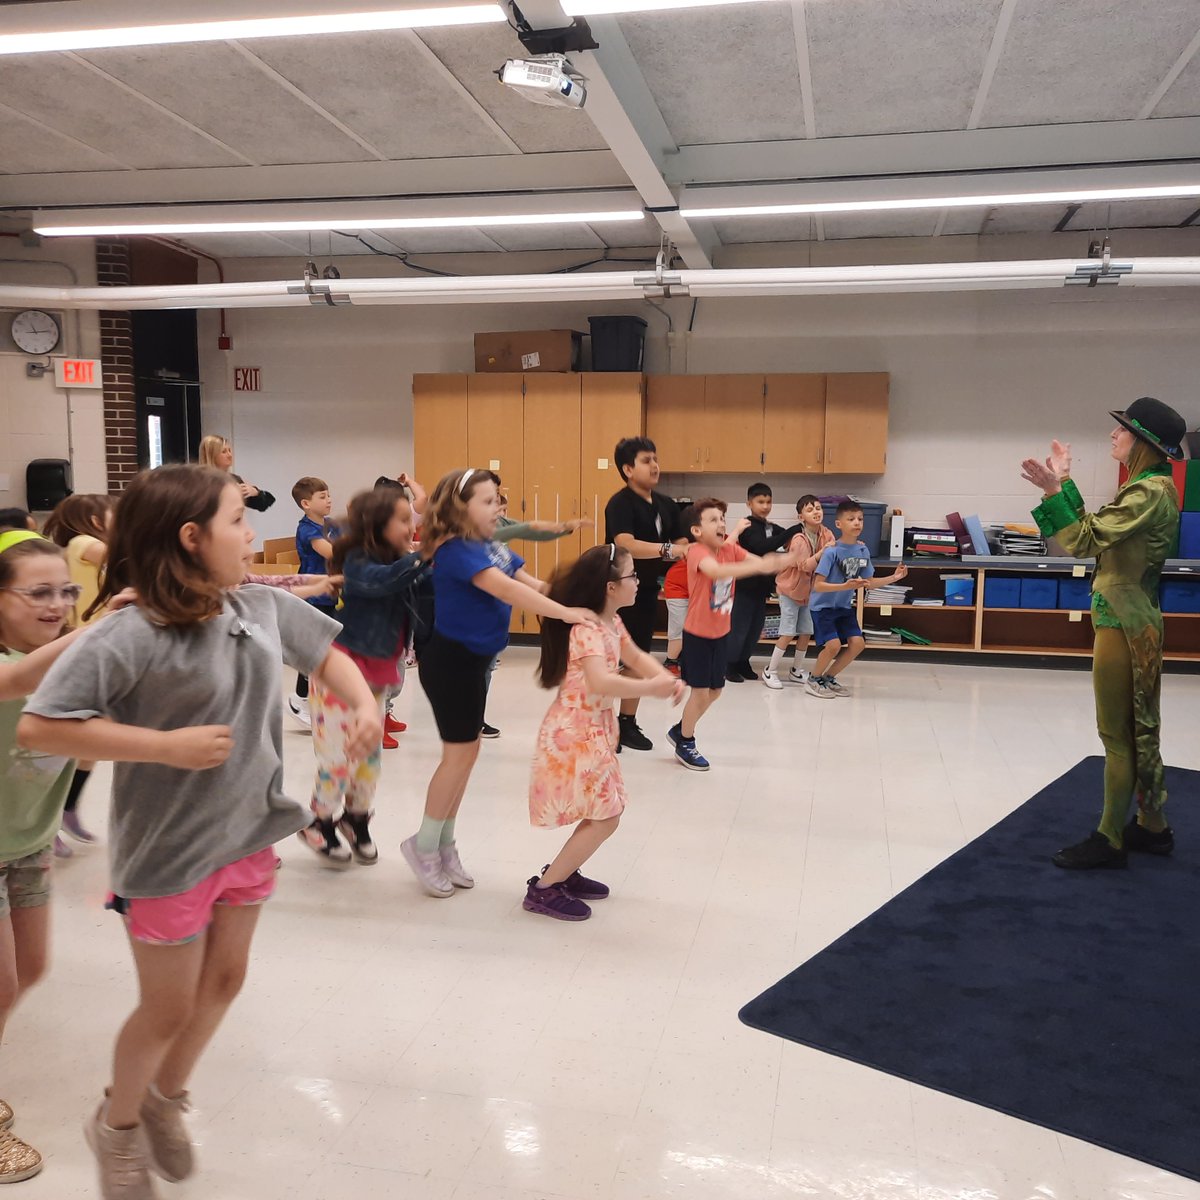 2nd grade @StoneSchool4 is learning about character traits, reading strategies, and ballet through the Literacy through Dance program.  Thank you @SaltCreekBallet
and @AddisonSD4 Educational Foundation for Excellence for making this program possible! #ASD4ALL